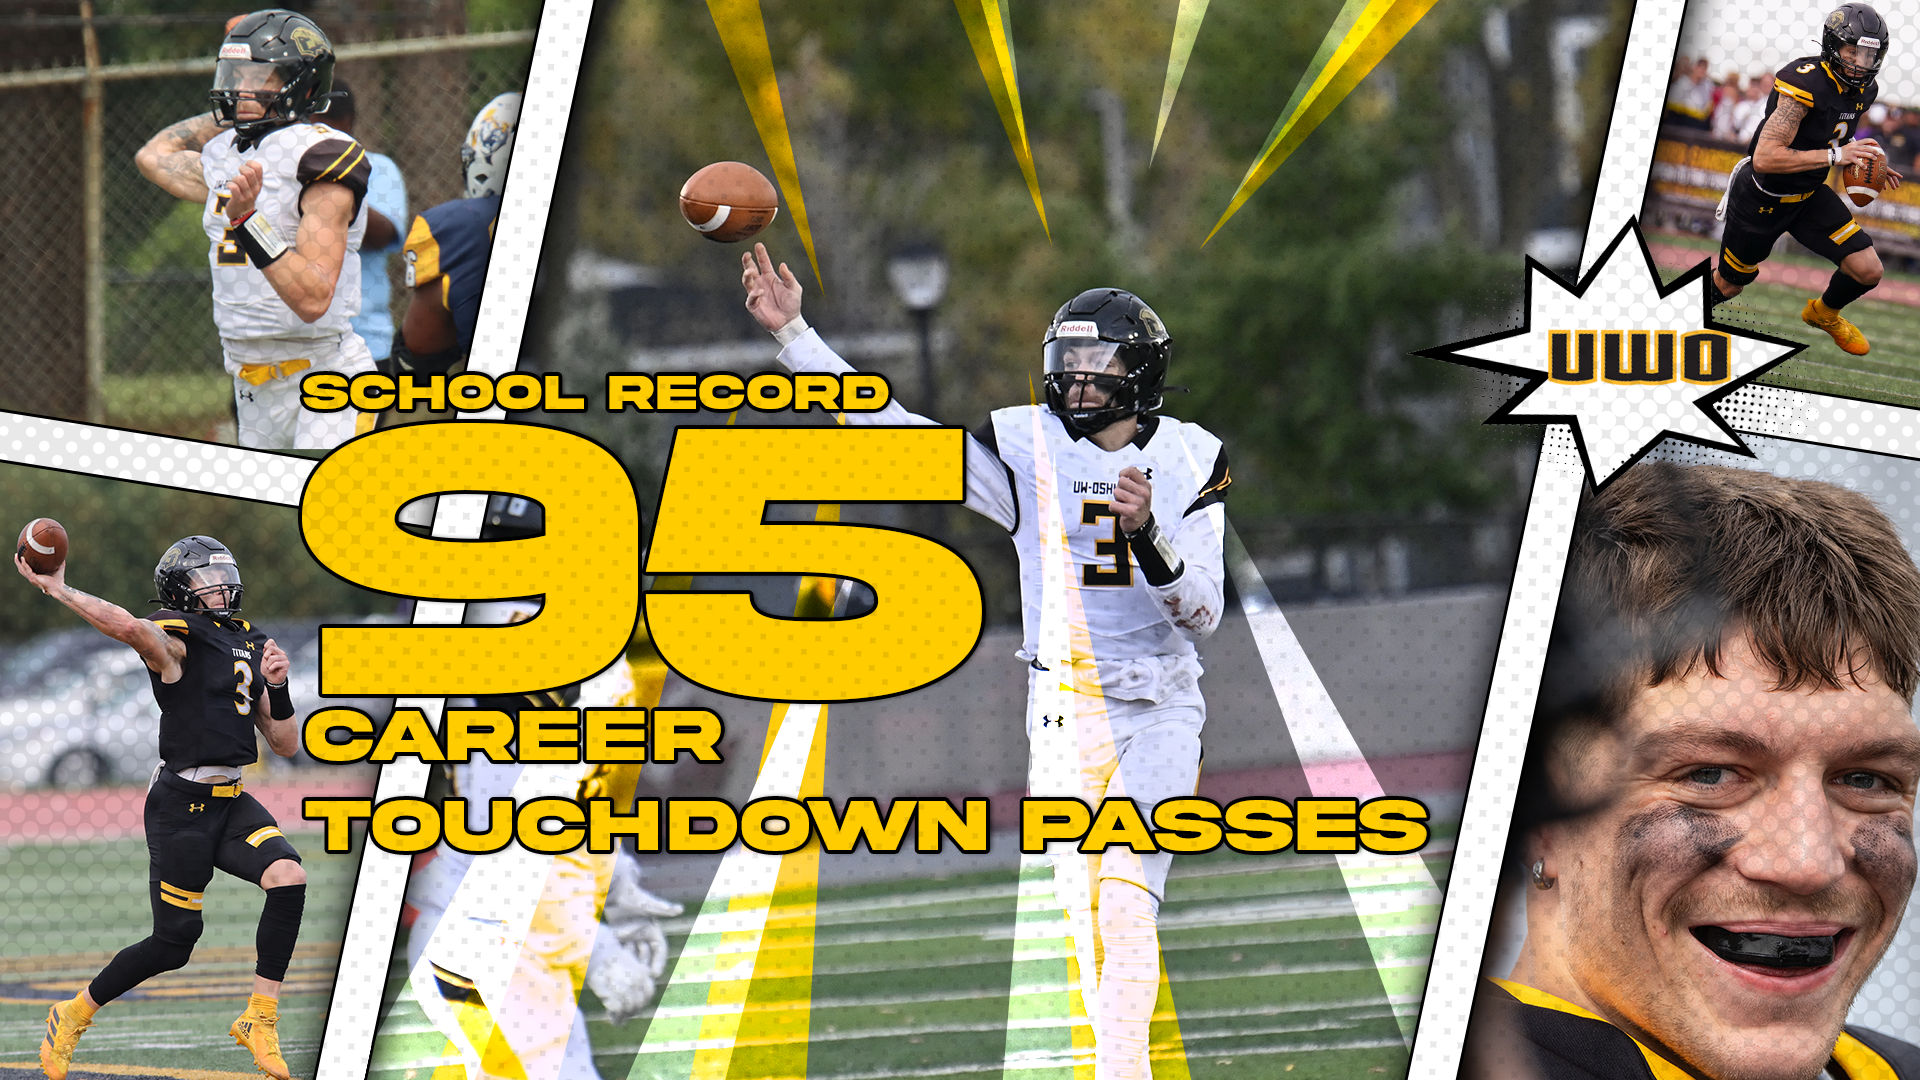 Kobe Berghammer set the school career passing touchdown record at 95 during the Titans' 66-28 win over UW-Stevens Point